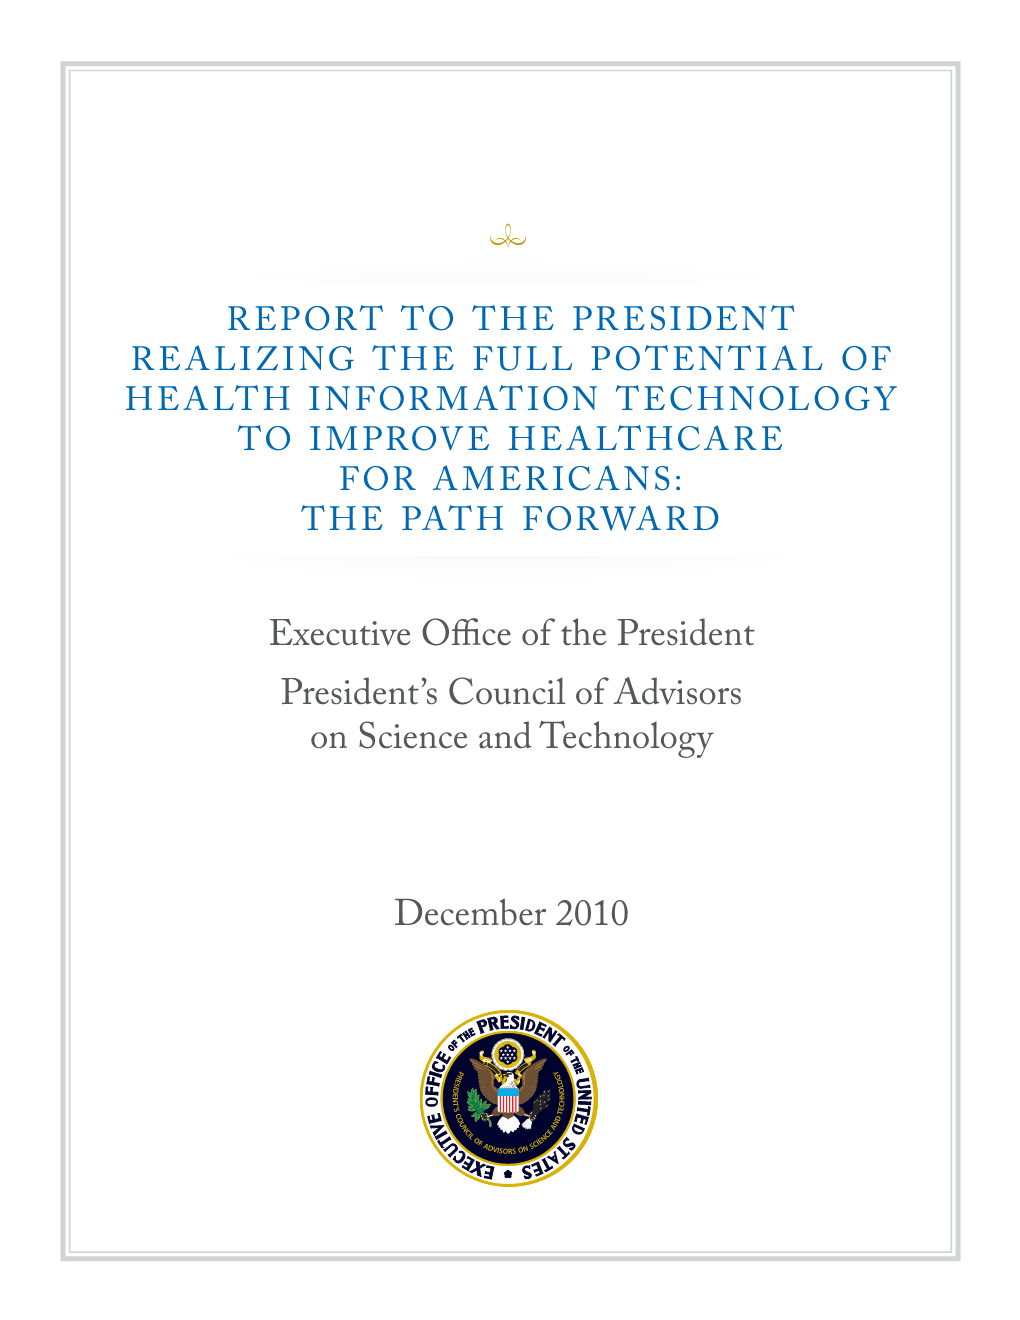 Executive Office of the President President's Council of Advisors On